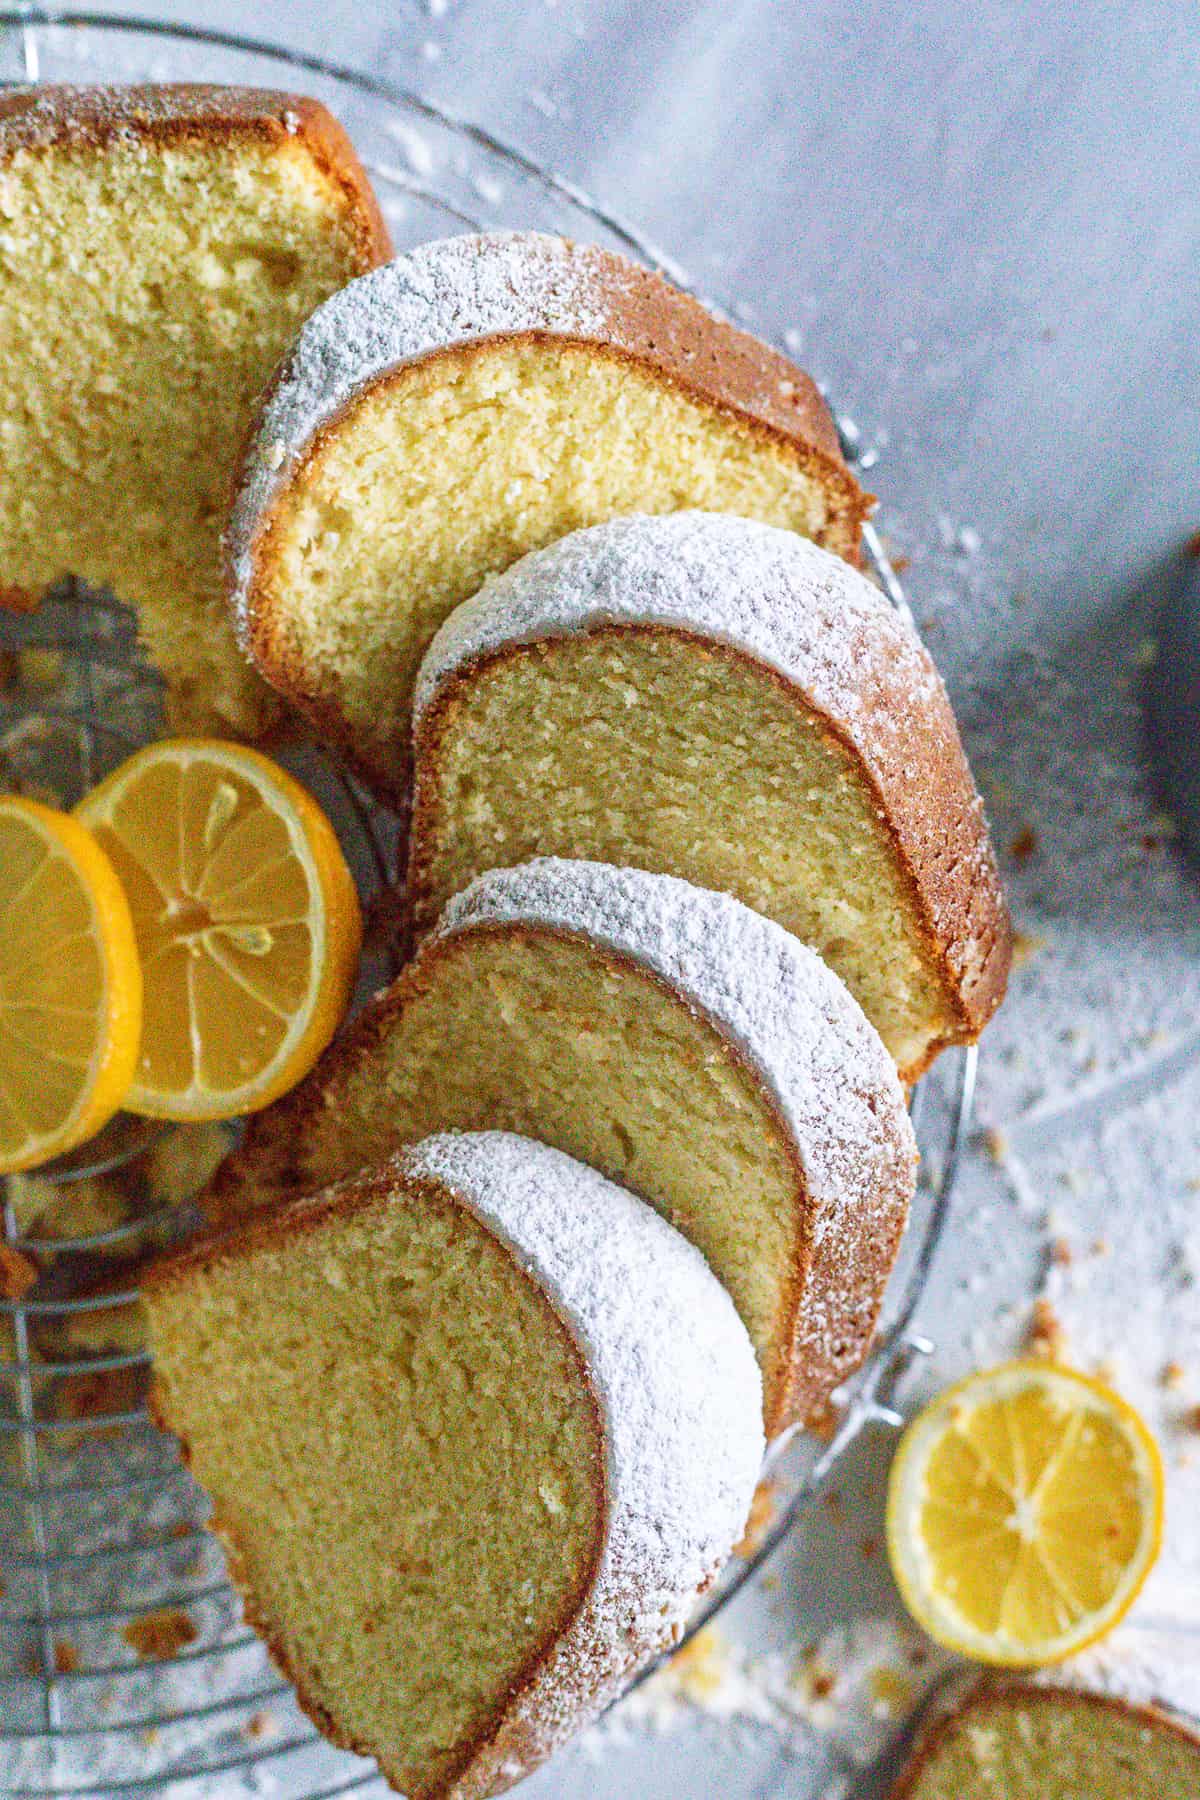 Sour Cream Pound Cake sliced on a wire rack and garnished with lemons.